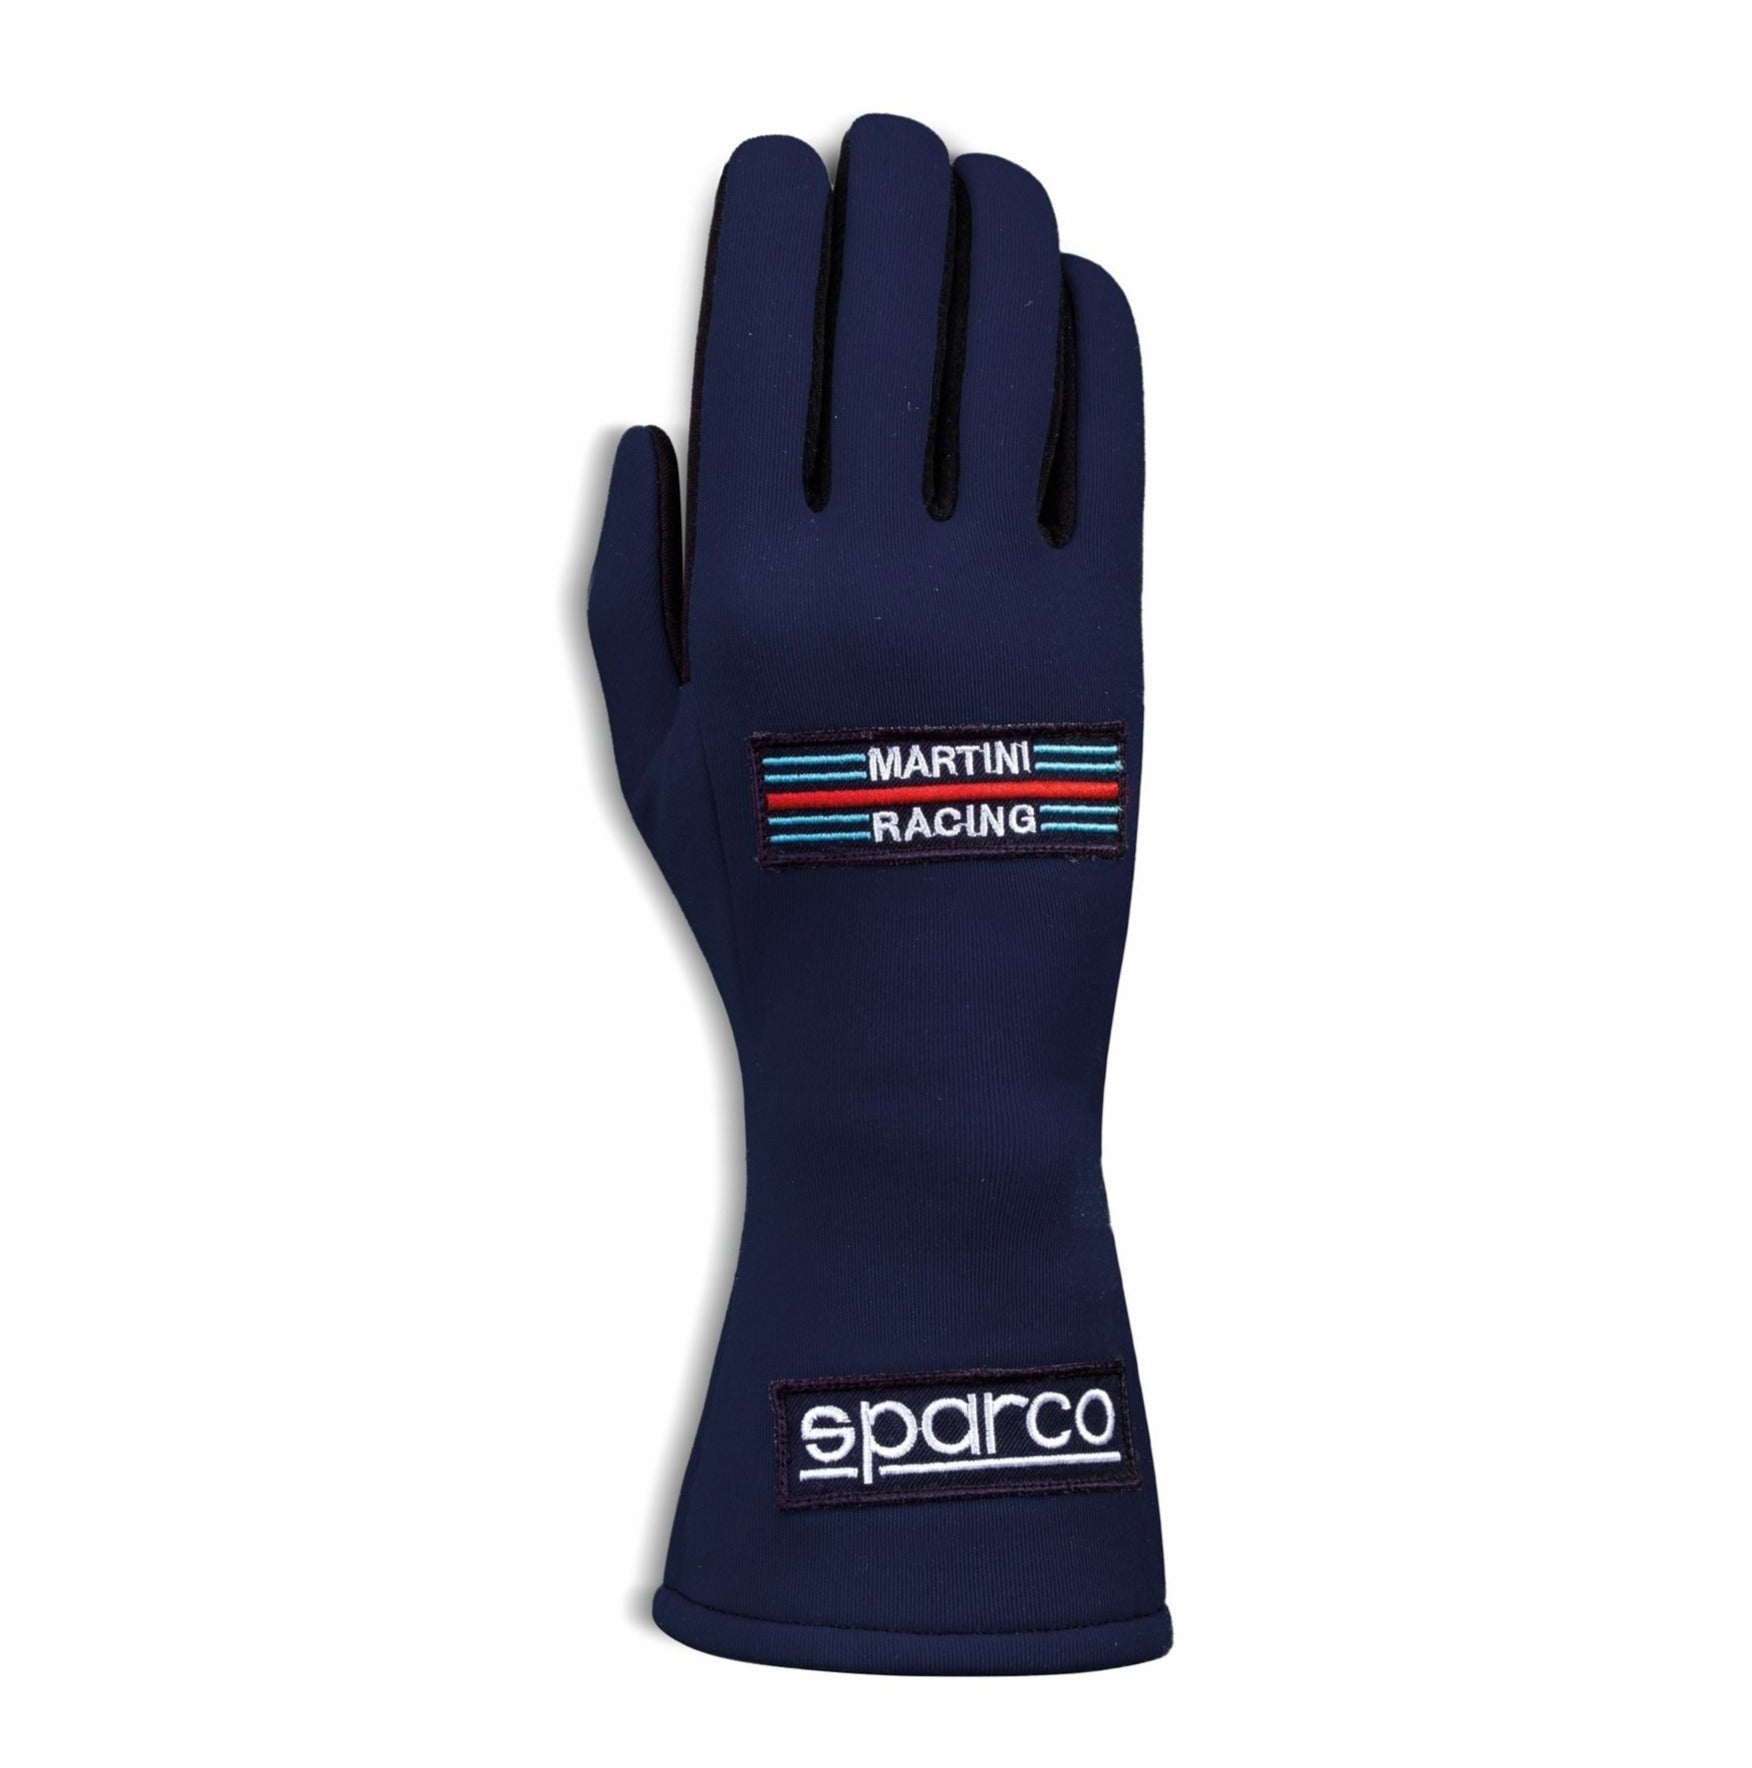 Sparco Martini Land Gloves